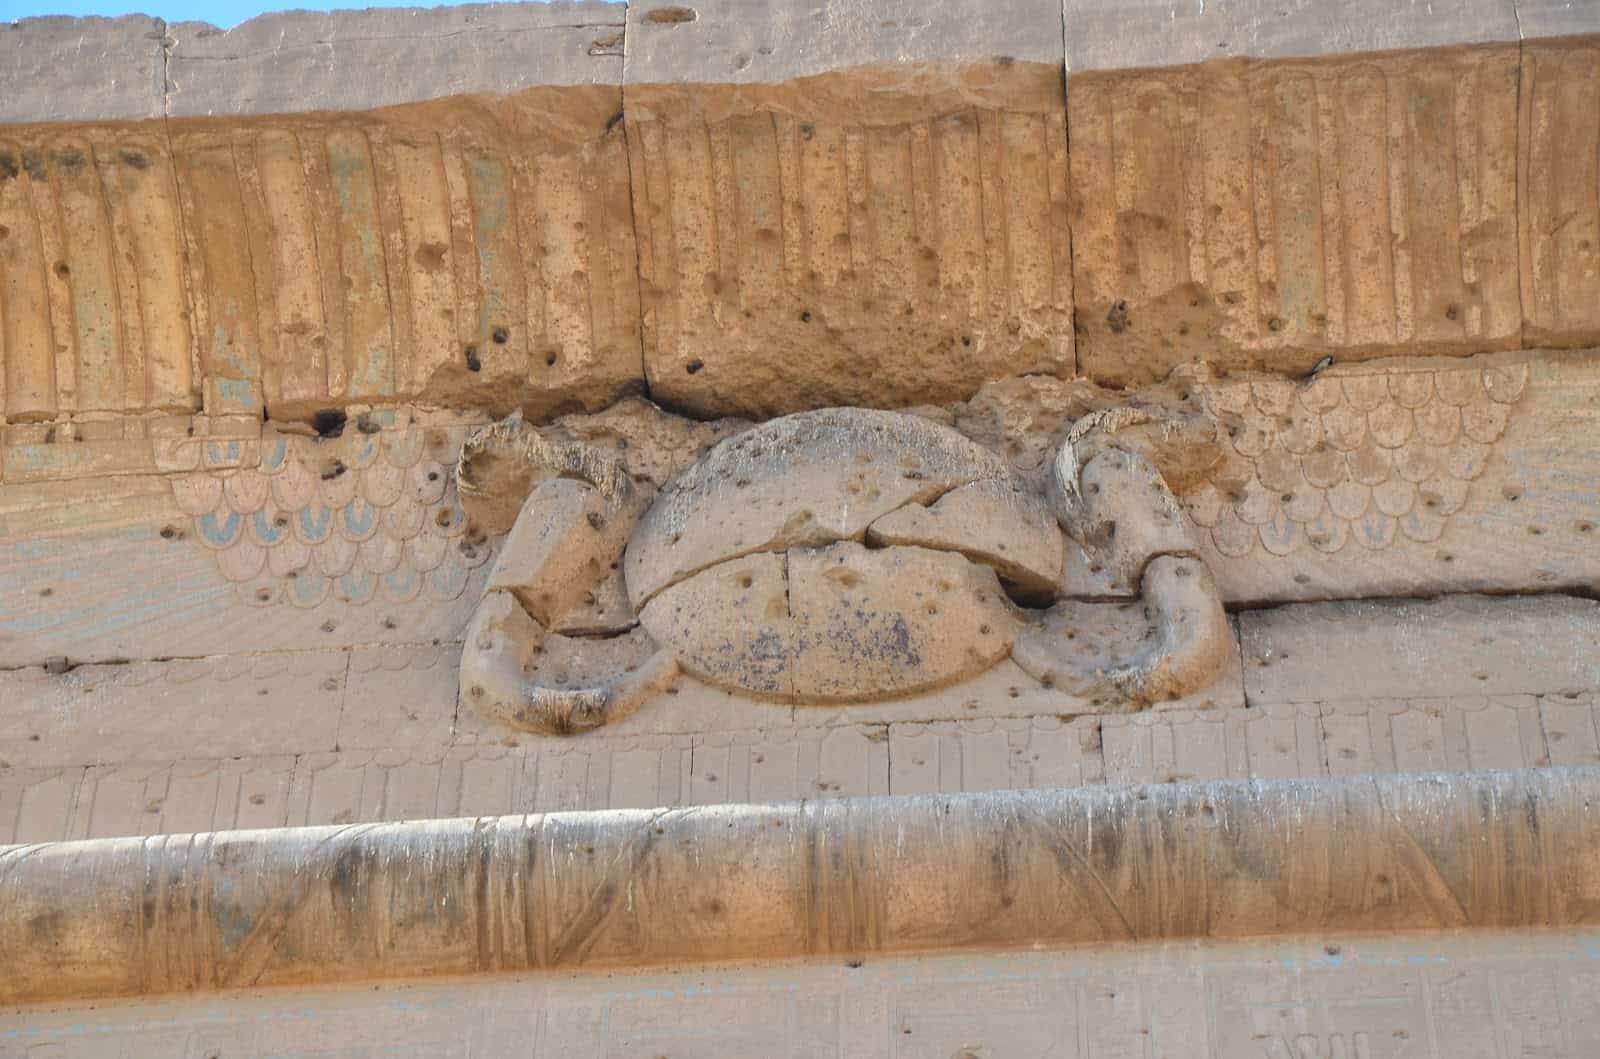 Bullet holes left by Napoleon’s army at the Temple of Edfu, Egypt